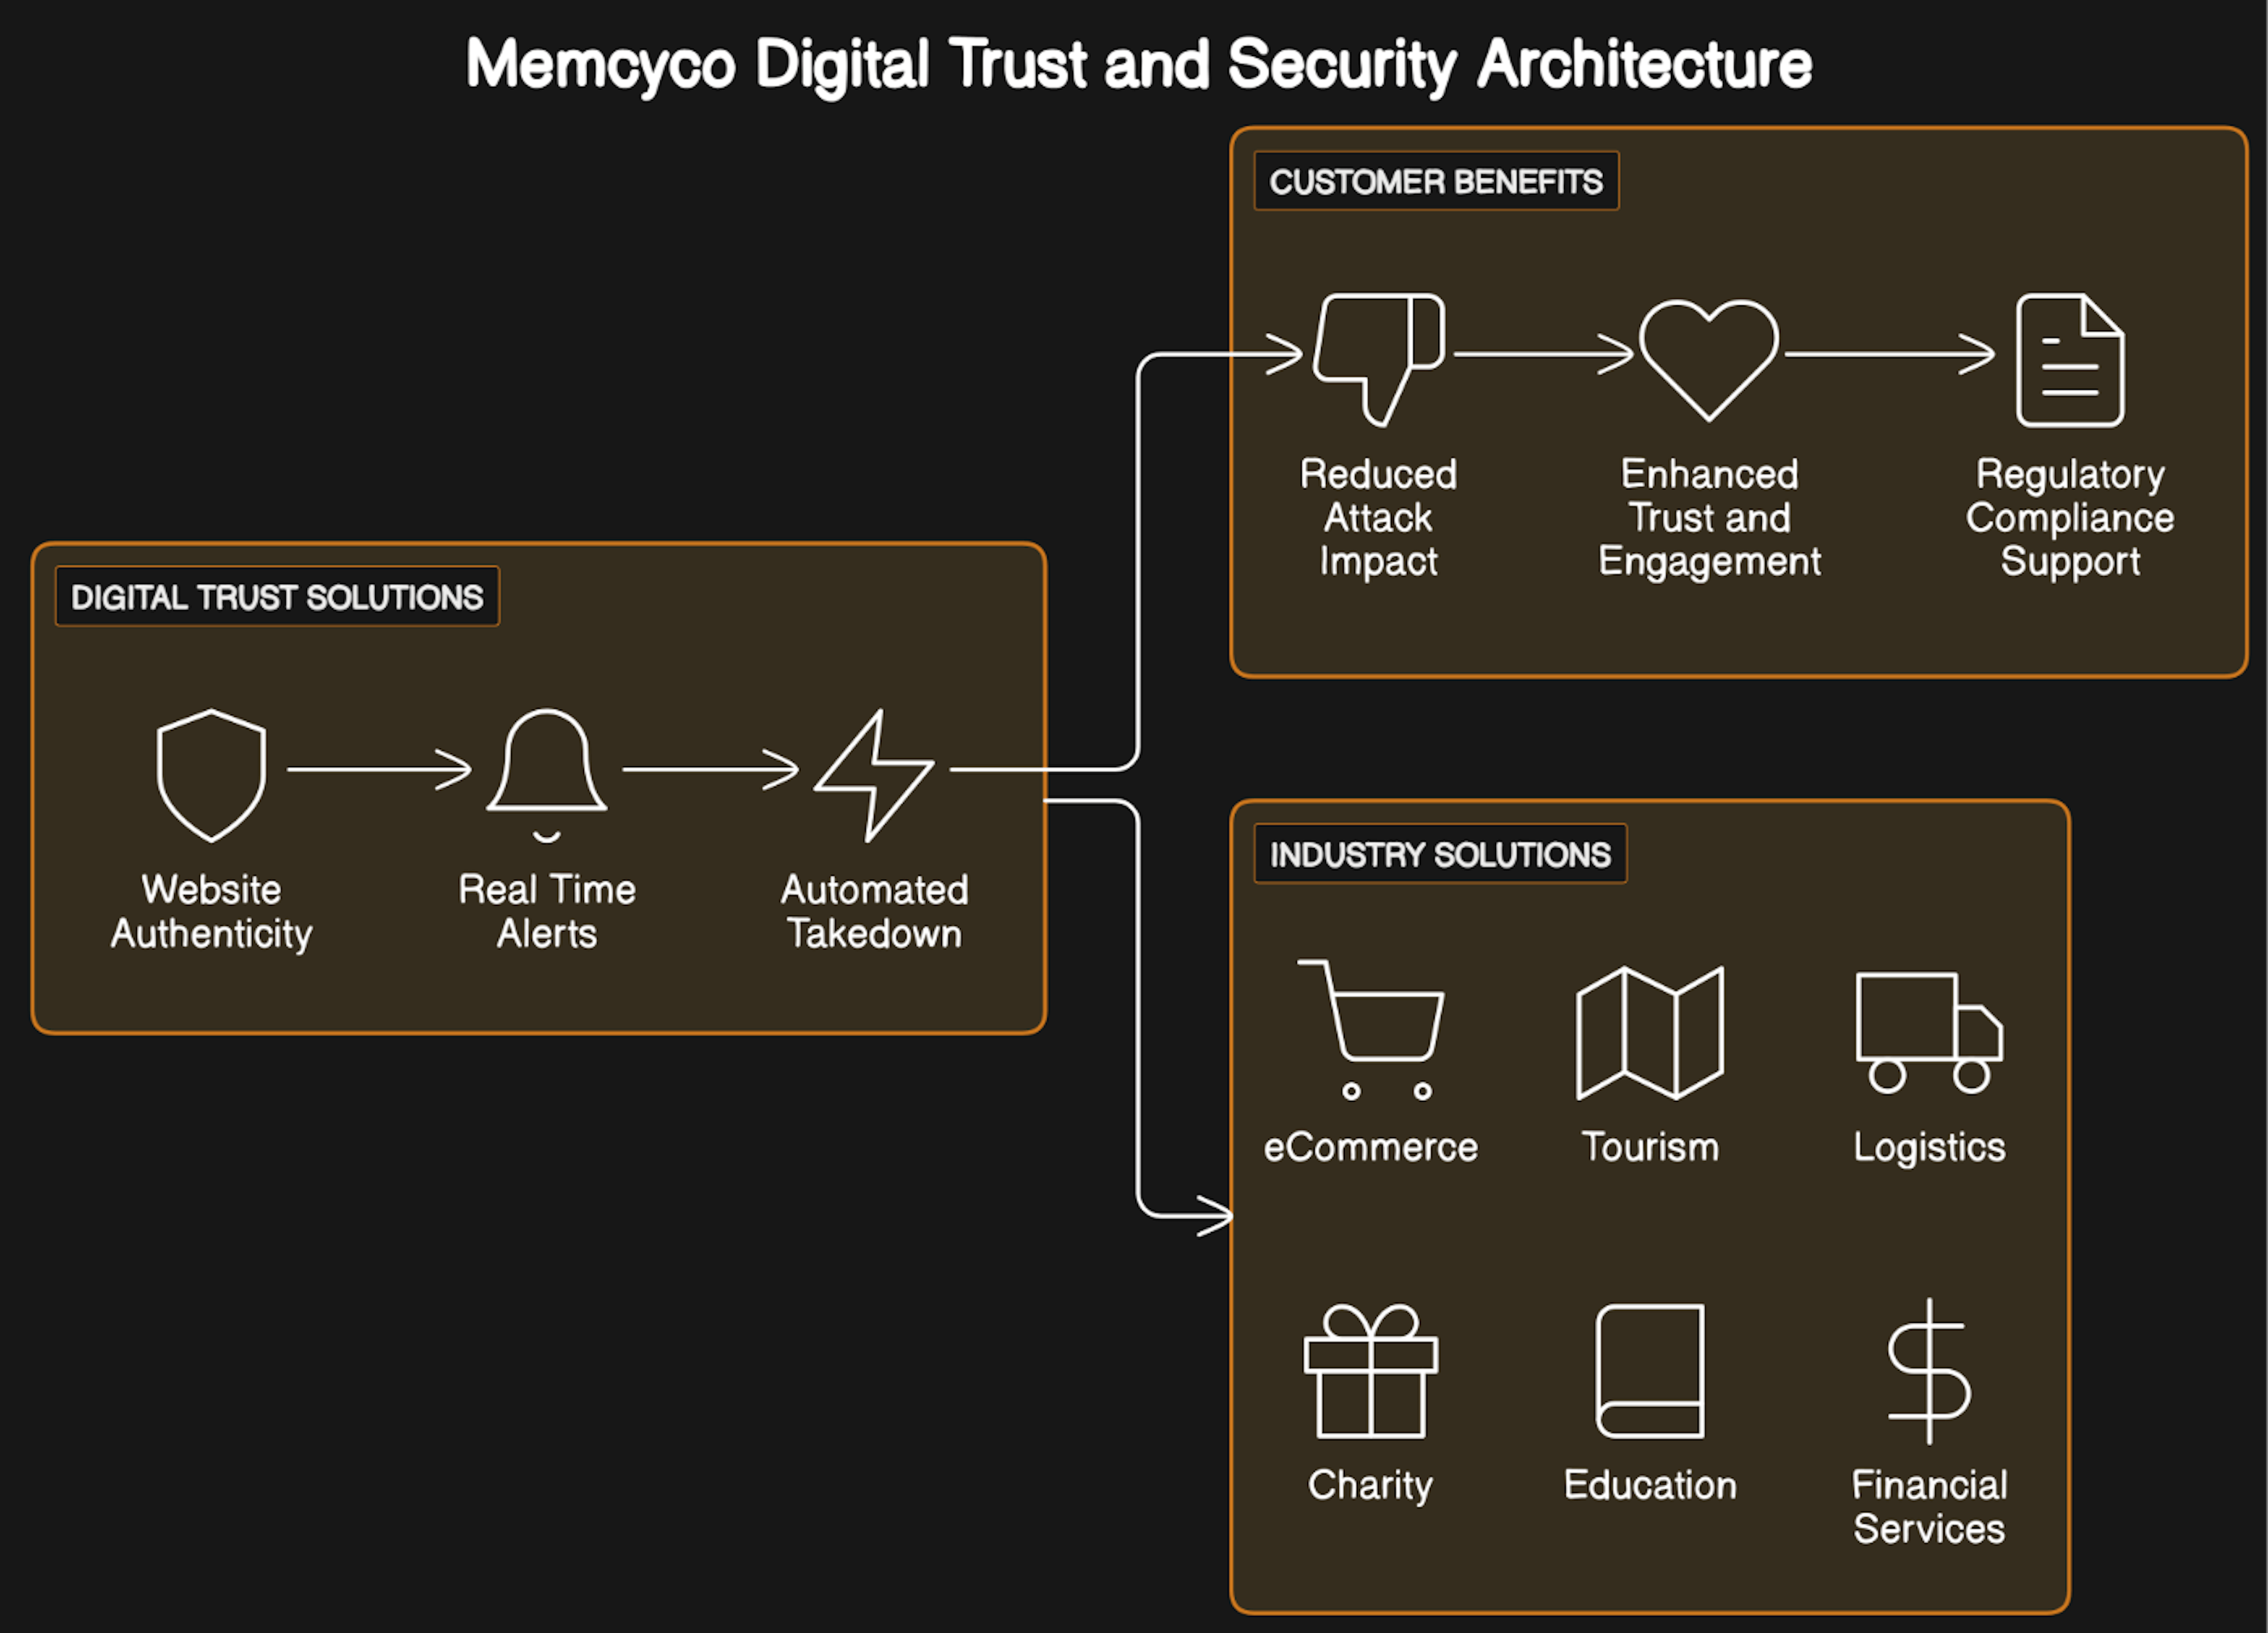 Memcyco Digital Trust and Security Architecture Illustration